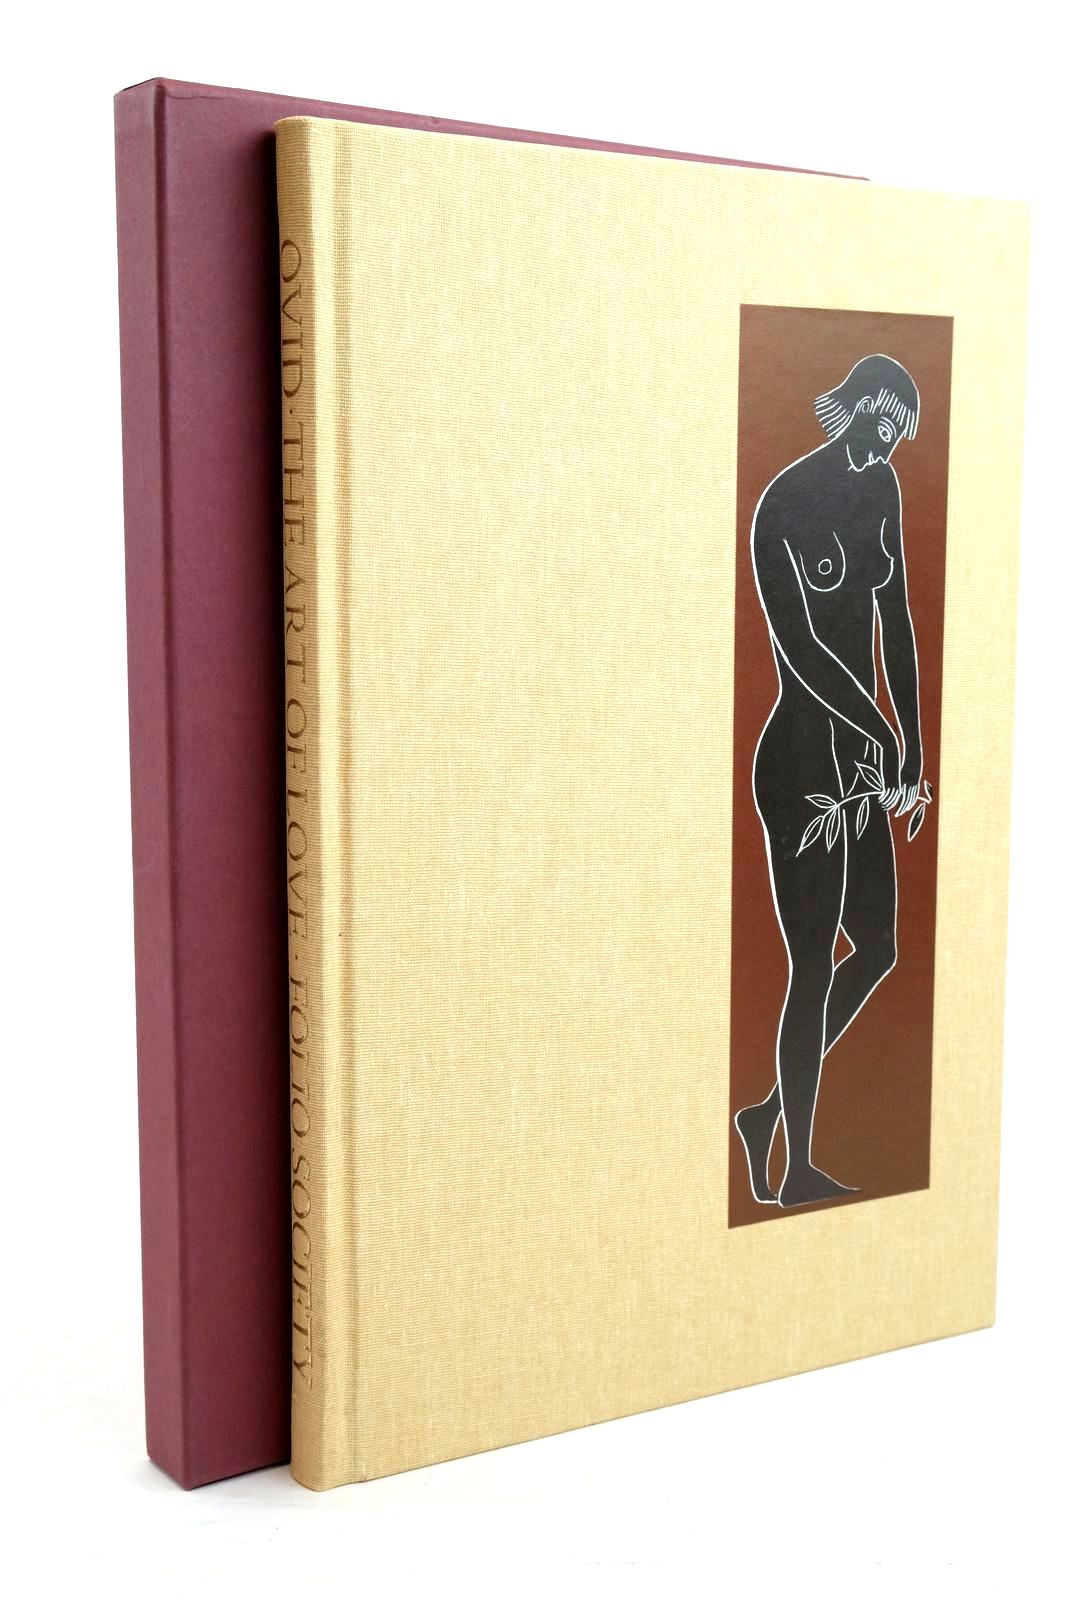 Photo of THE ART OF LOVE written by Ovid,  Naso, Publius Ovidius Michie, James illustrated by Baker, Grahame published by Folio Society (STOCK CODE: 1320806)  for sale by Stella & Rose's Books